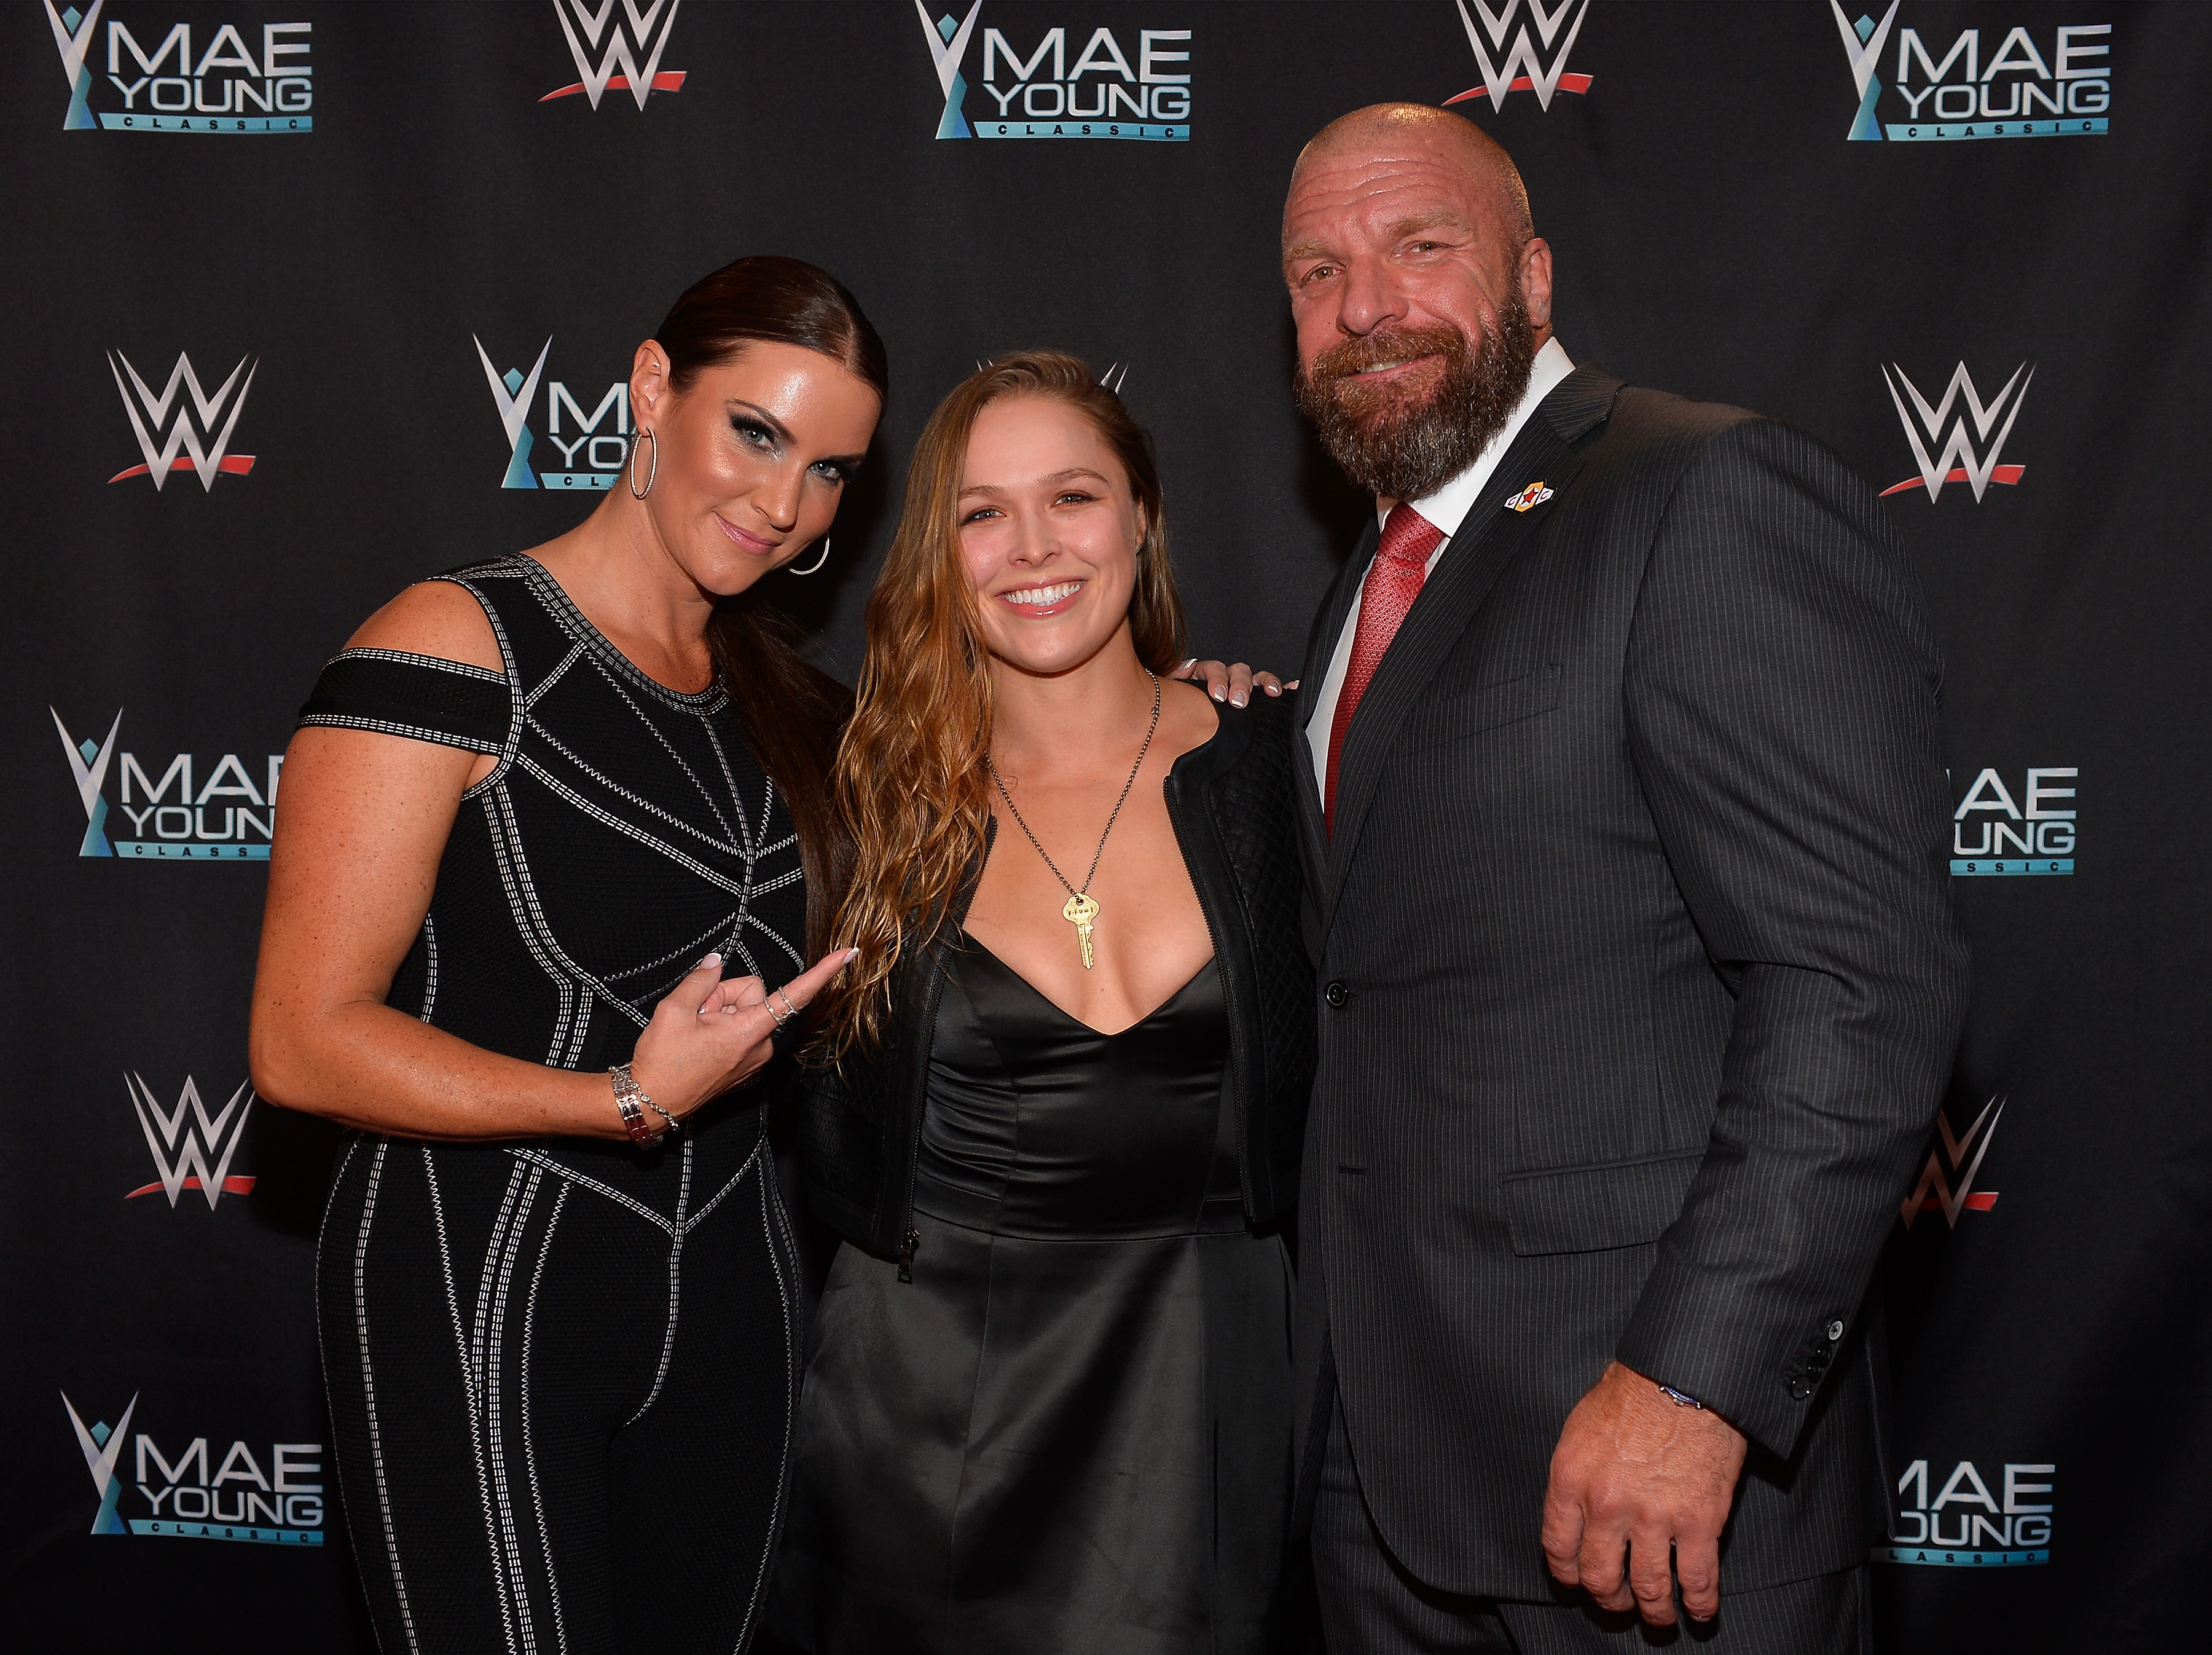 Backstage News On Ronda Rousey’s Rumble Debut: When Will Her 1st Match Be?, How’d The Live Crowd React?, Did The Locker Room Know?, More